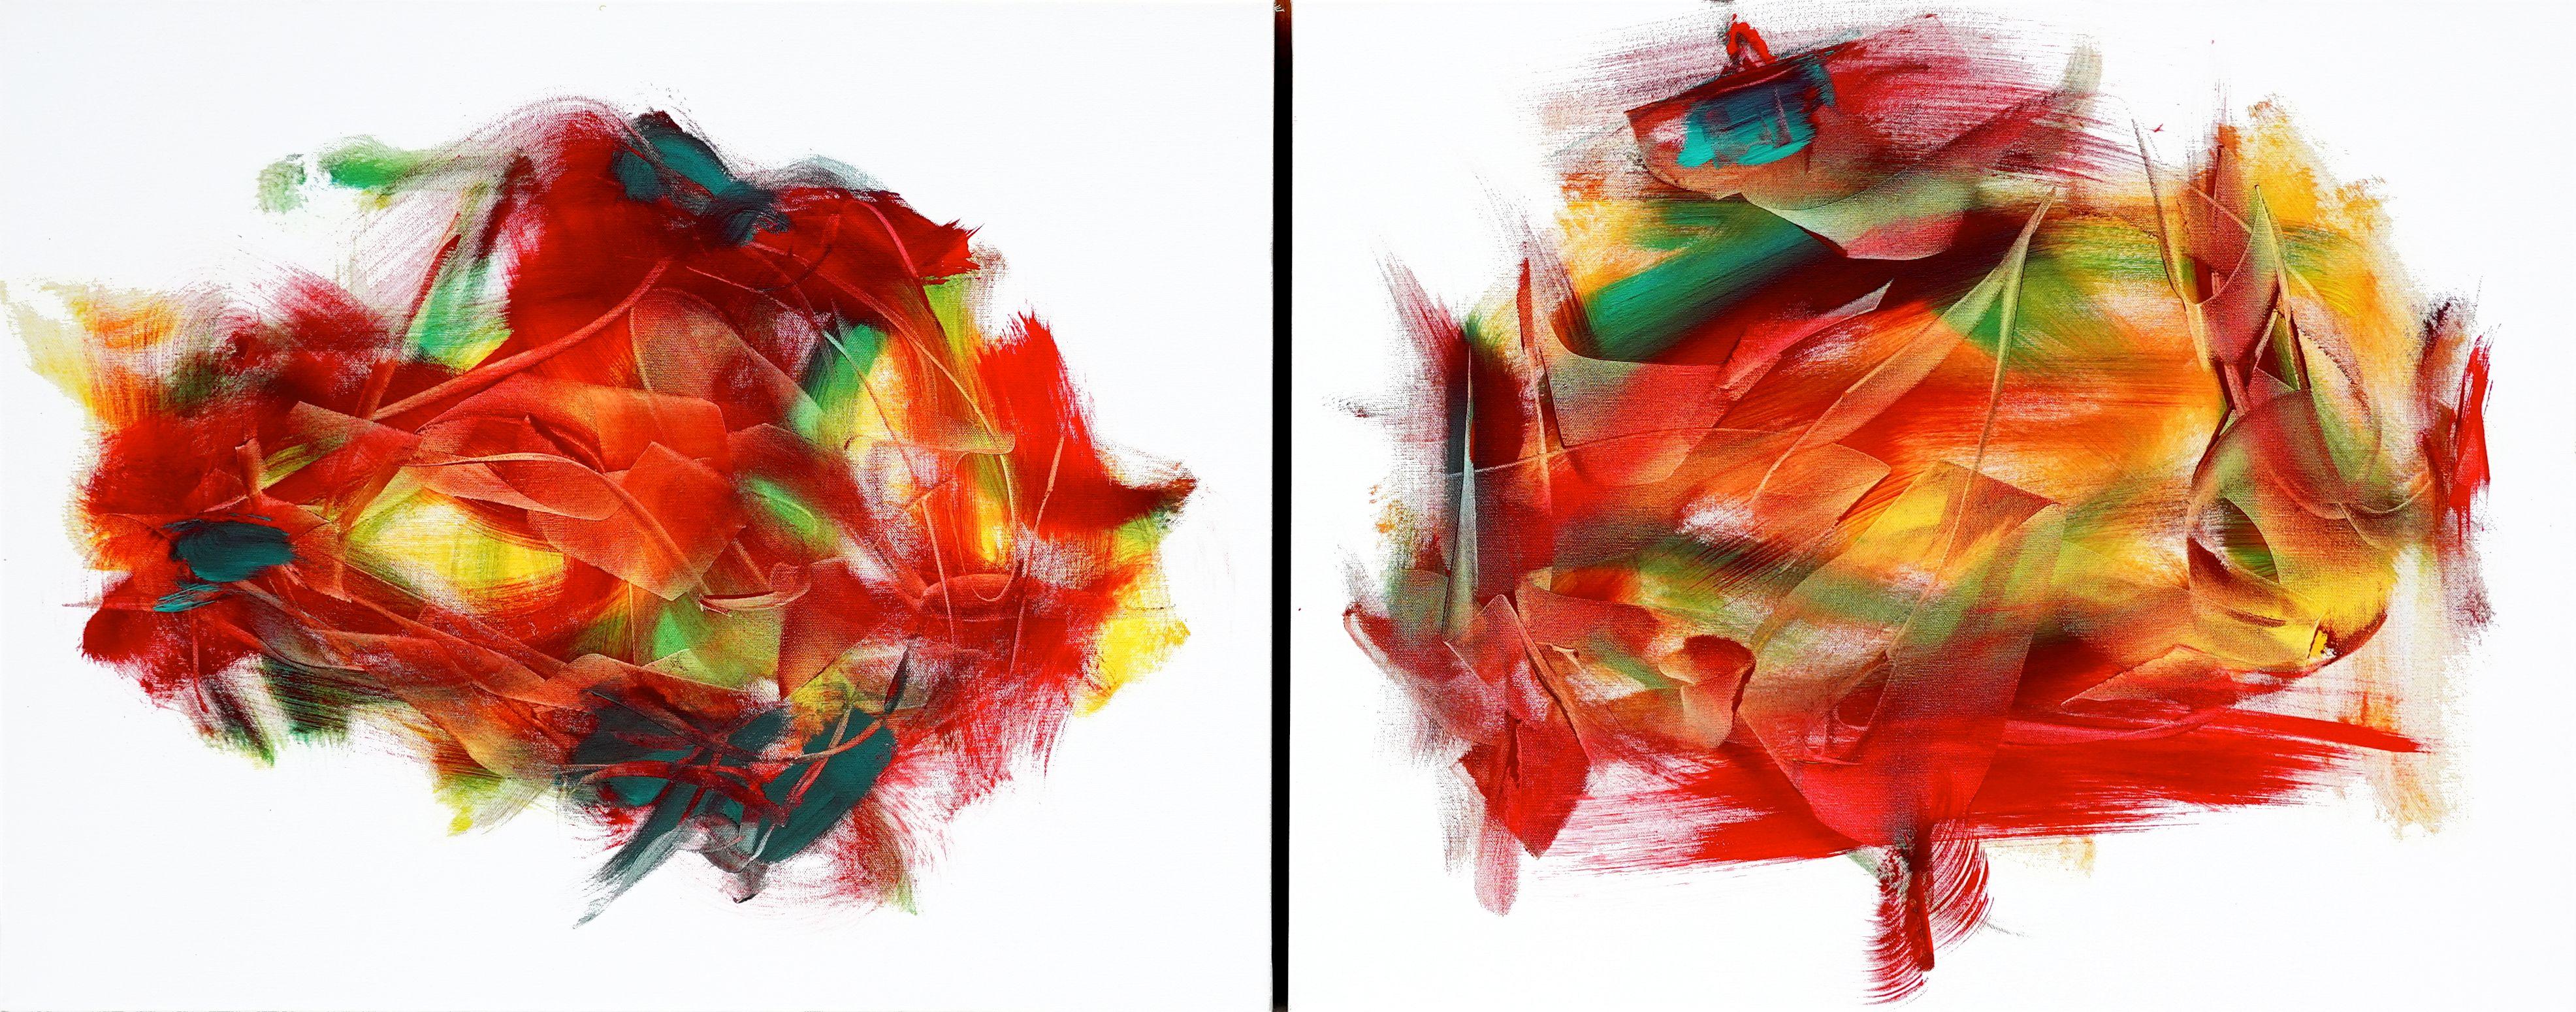 "Like-Minded" diptych is all about finding your soulmate. It's a perfect example of Hunter's highly fluid, expressionistic style -- which so often results in arresting images with a sense of depth and sculptural form. Gestural yet sensitive.